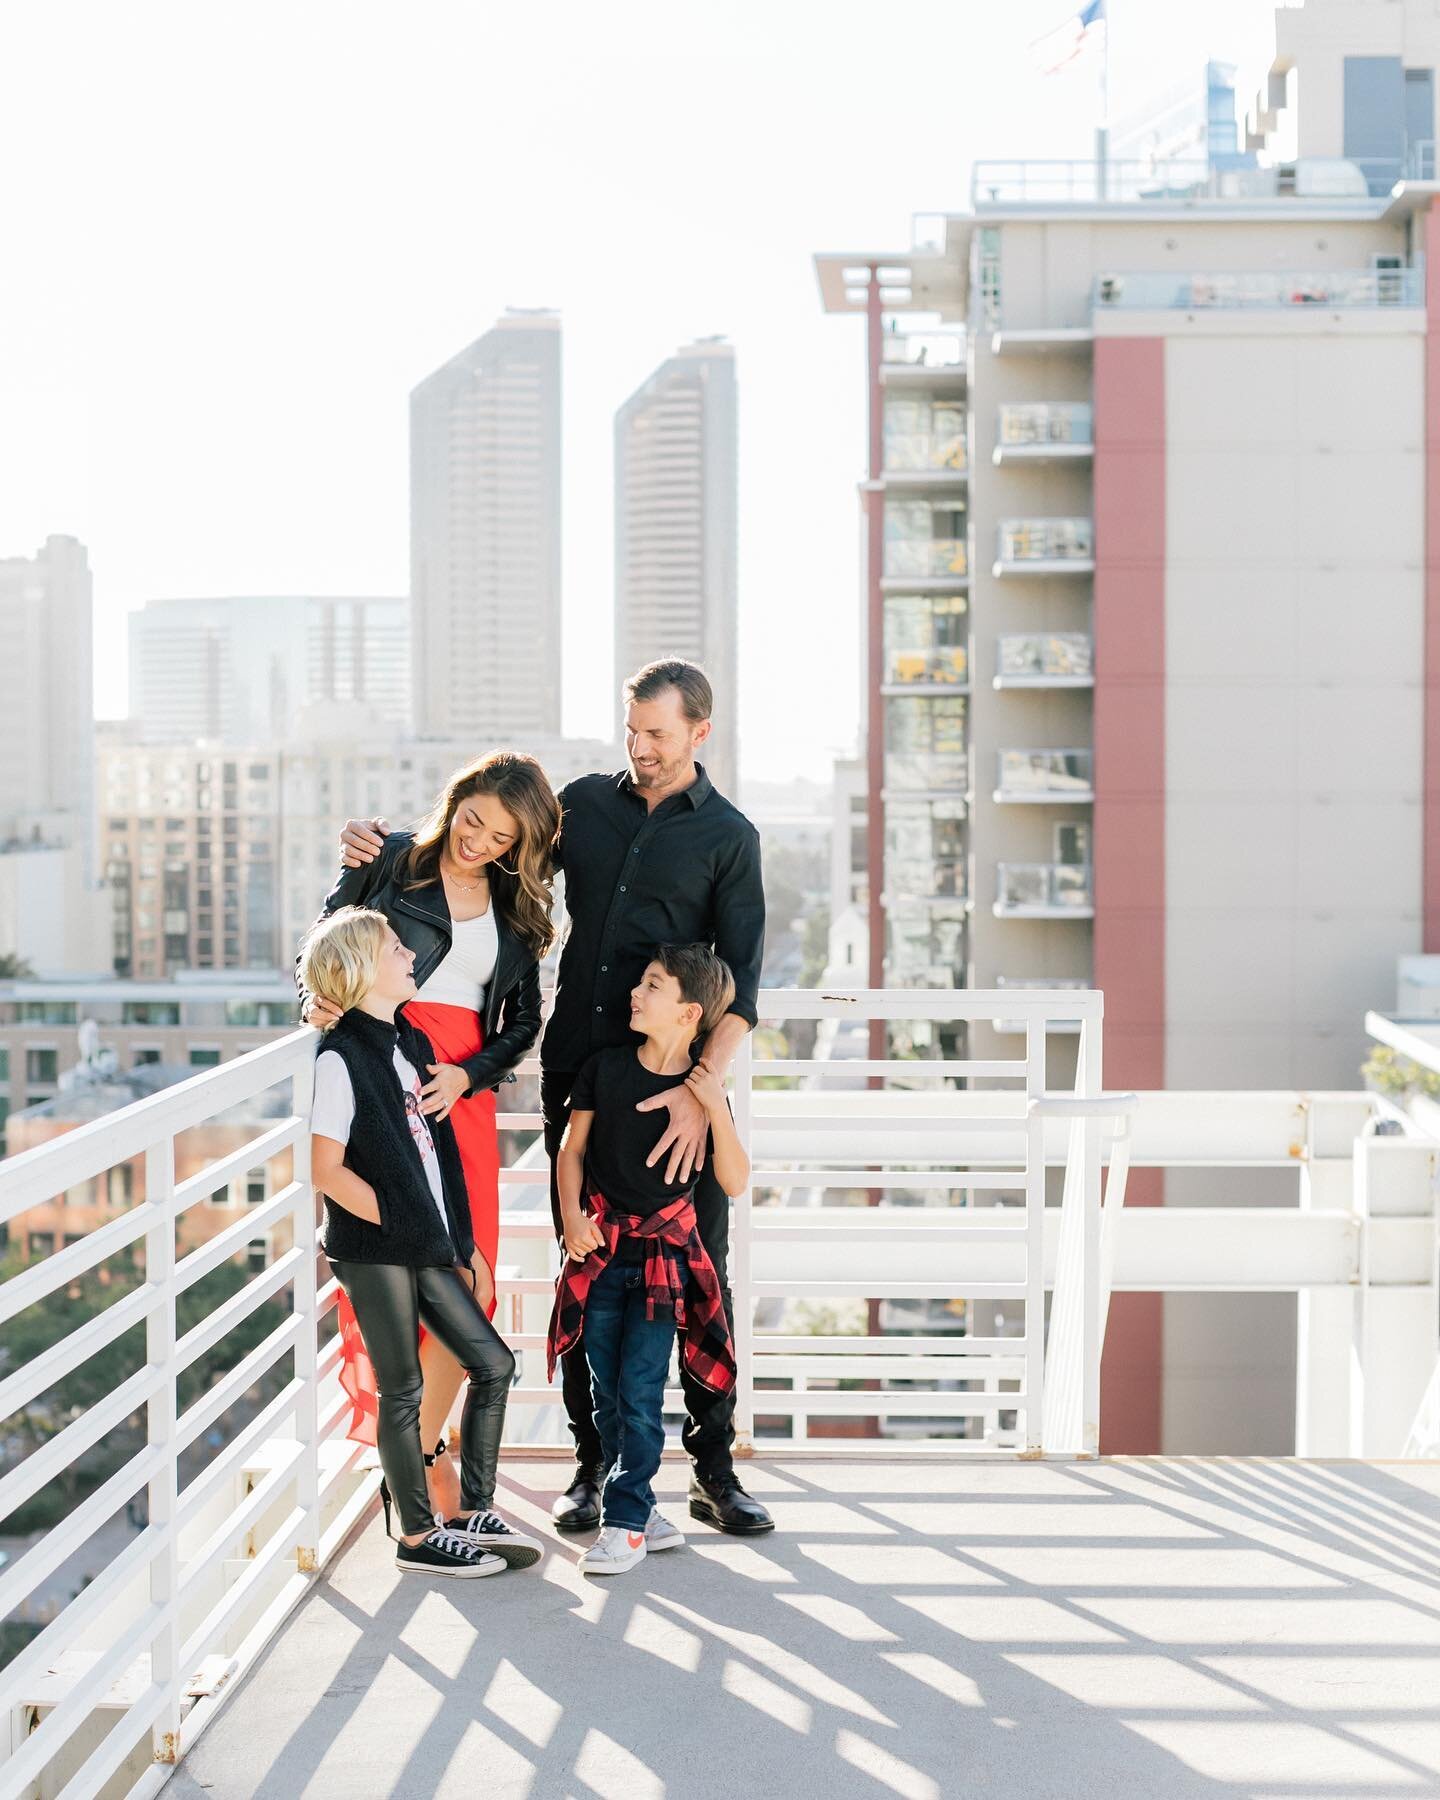 This family is making the city-girl inside of me so happy. 🏙 

I&rsquo;m currently in the middle of an editing cyclone, so just giving a quick thank you to my clients for your patience as I try to wrap these sessions up&hellip; and maybe enjoy a min